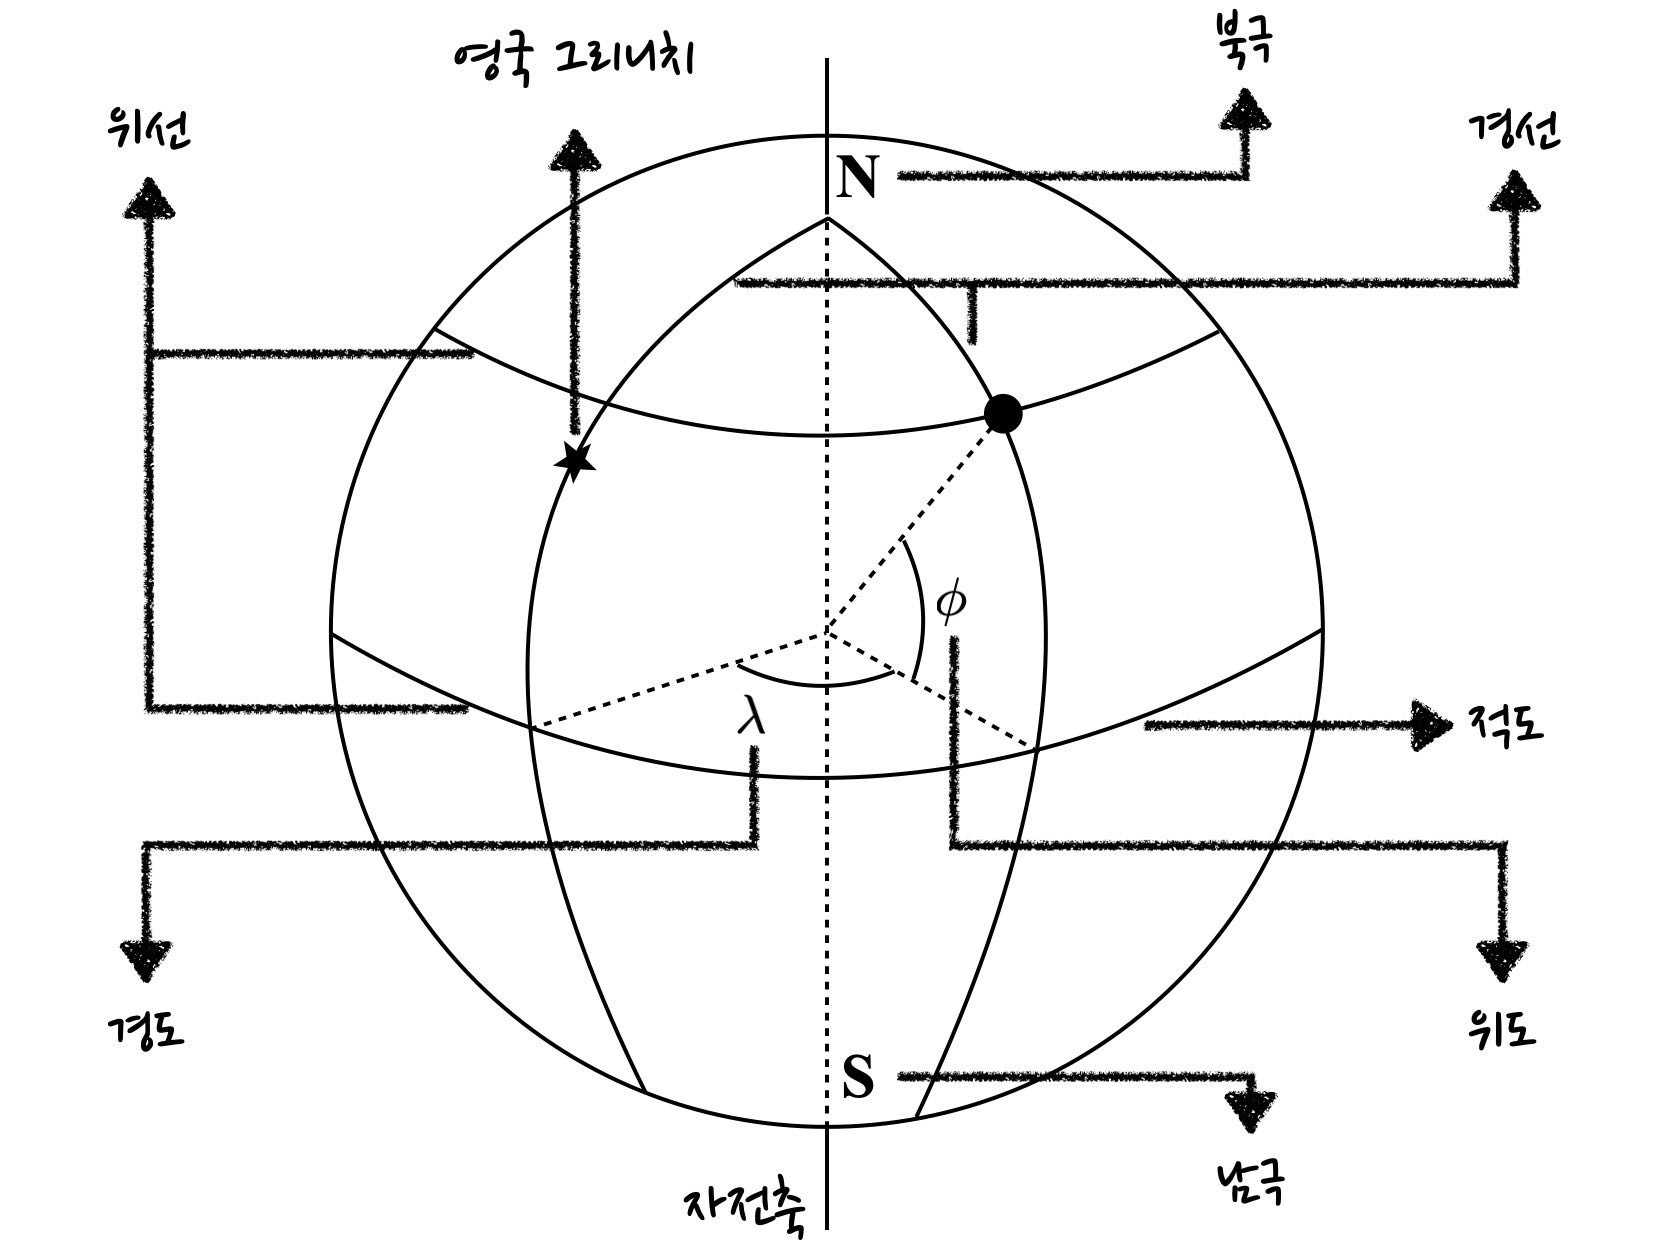 schematics of angular coordinates on spherical surface of the Earth&#44; showing definition of longitude and latitude